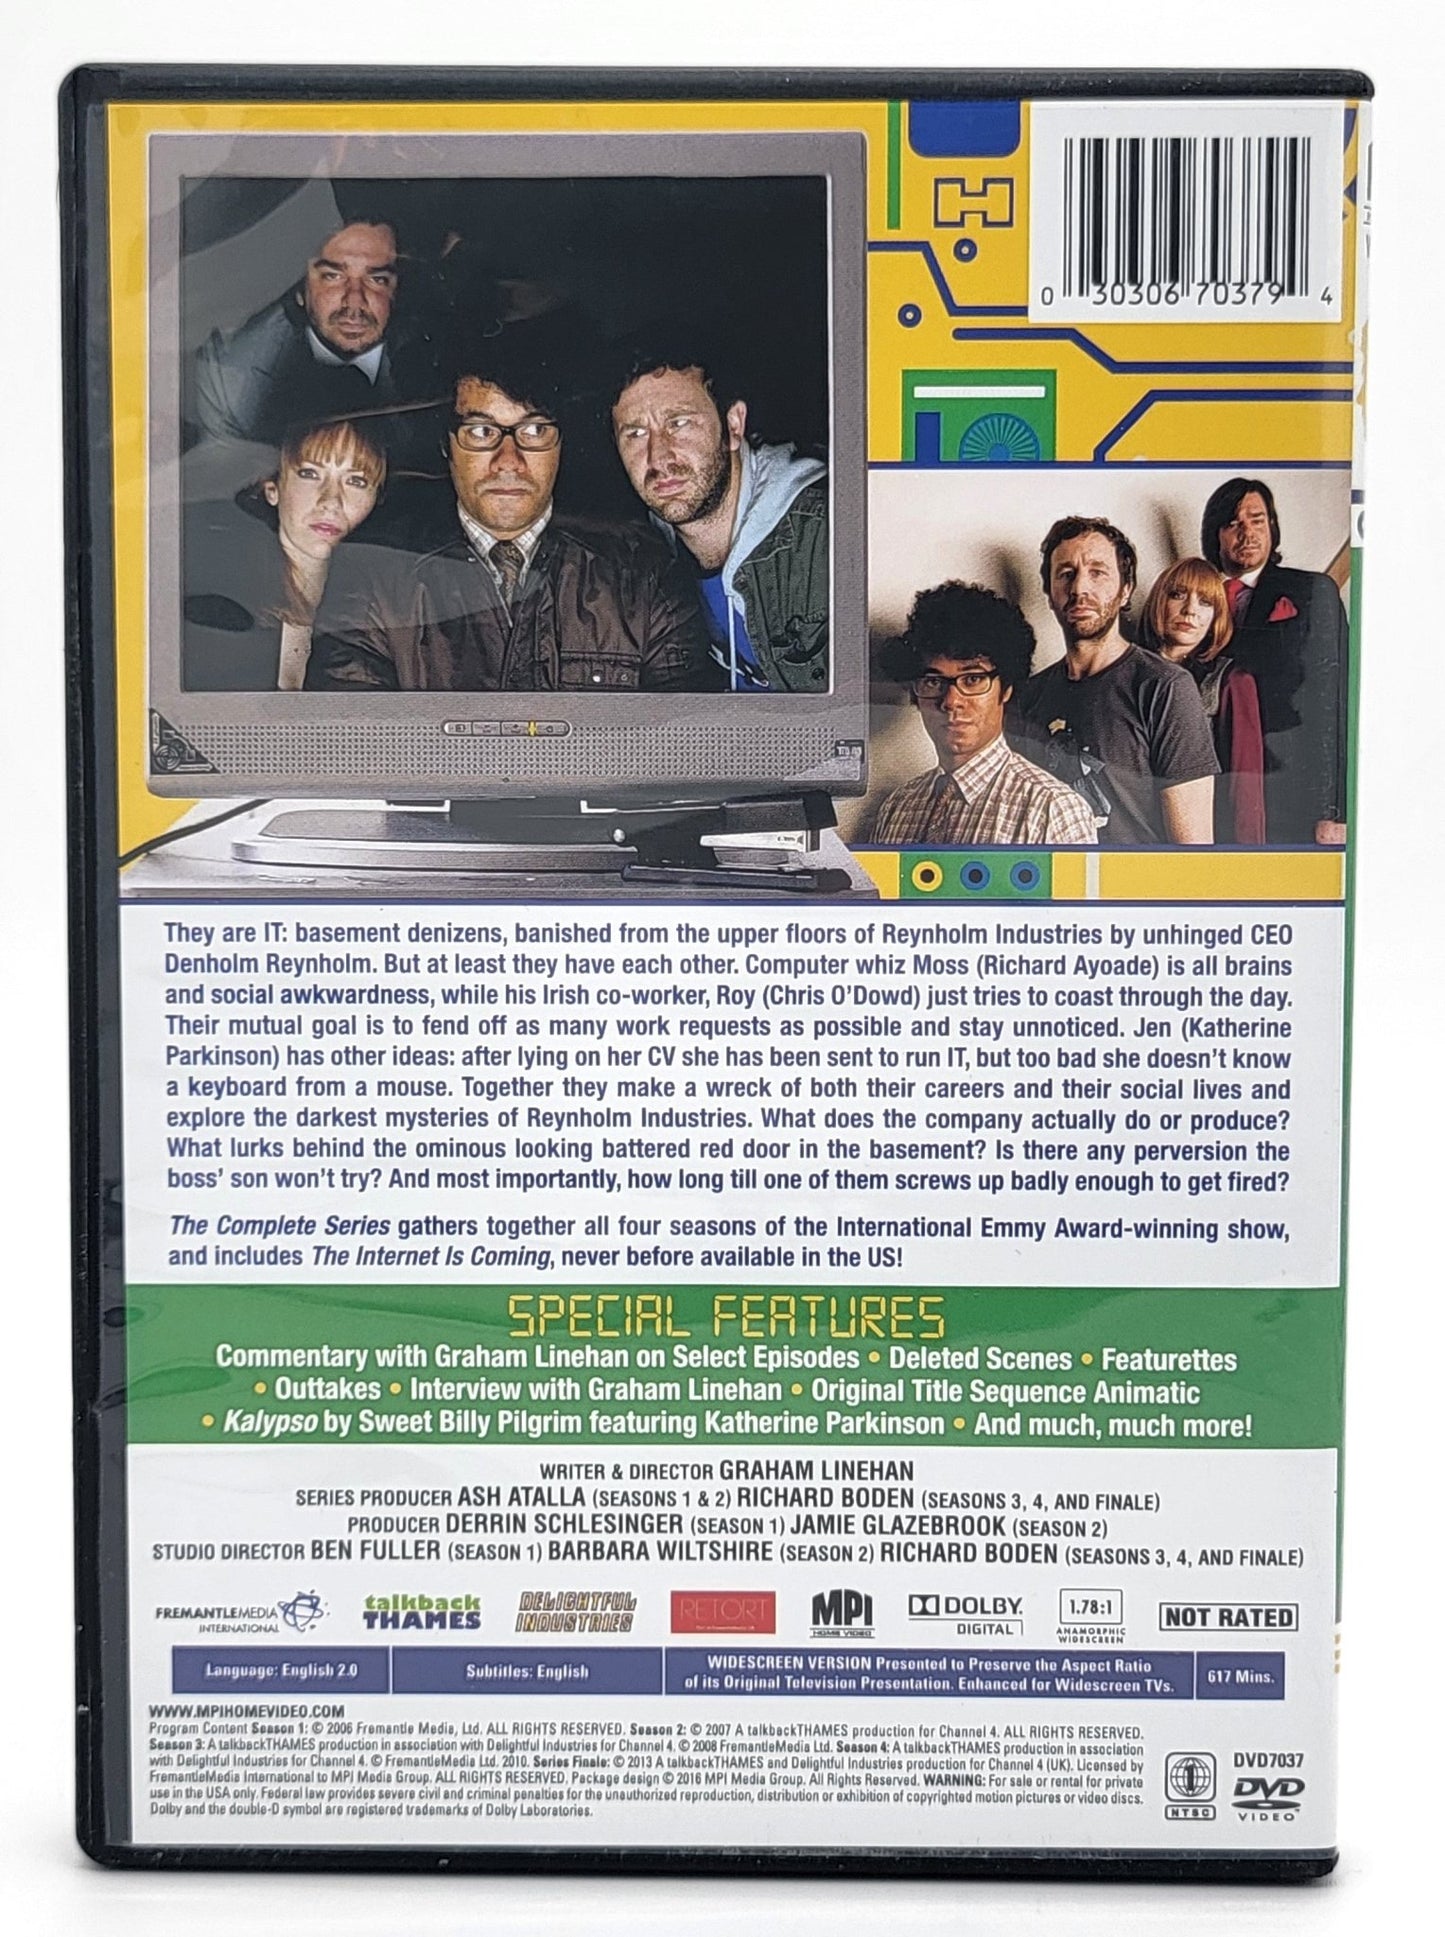 MPI Home Video - The It Crowd - Complete Series | DVD | Widescreen - 5 Disc Set - DVD - Steady Bunny Shop